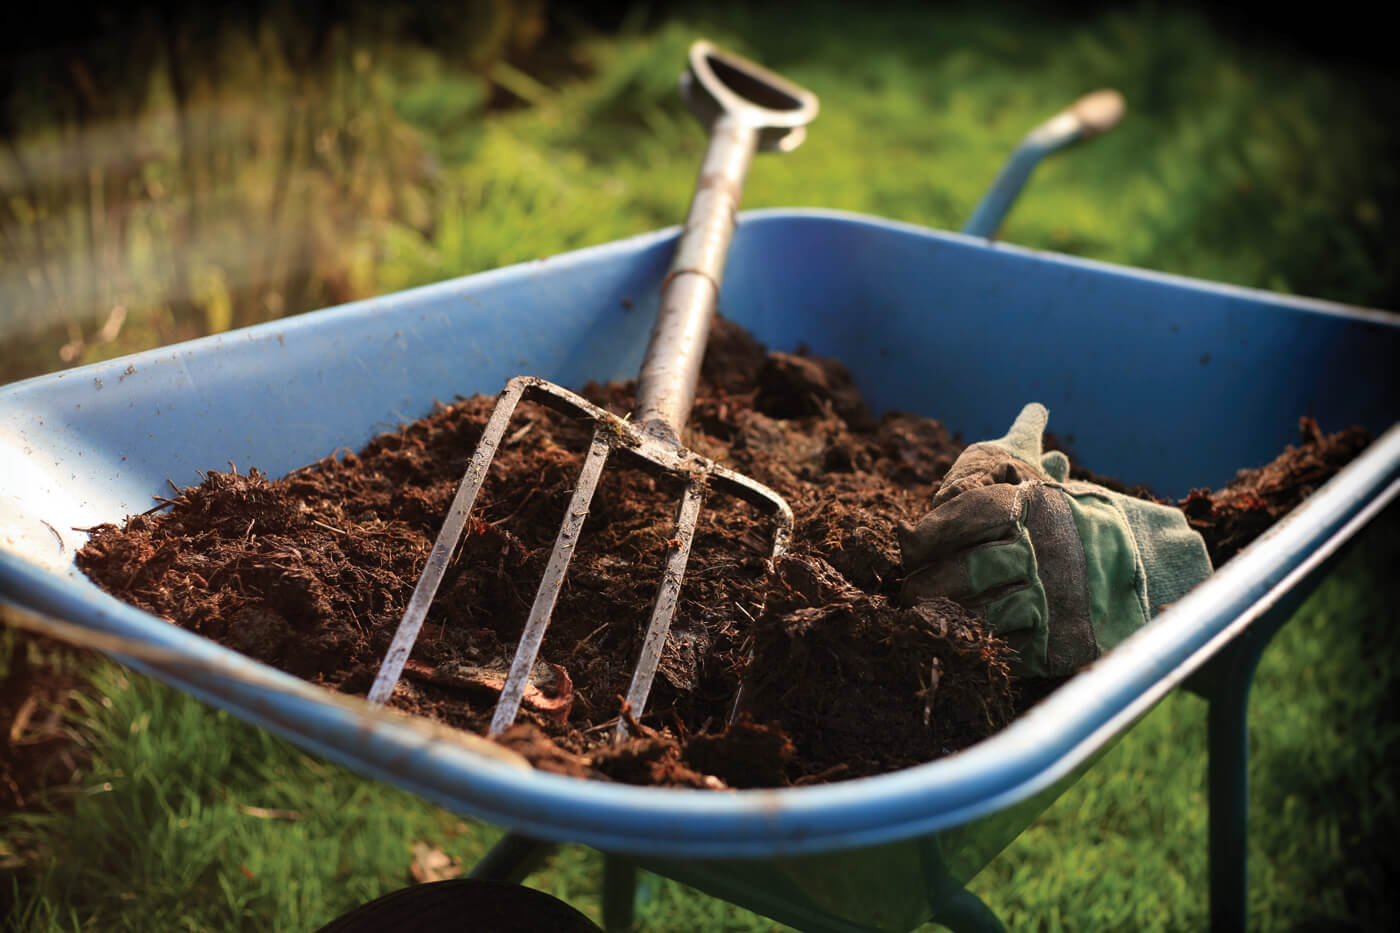 Pitchfork on wheelbarrow with soil and compost